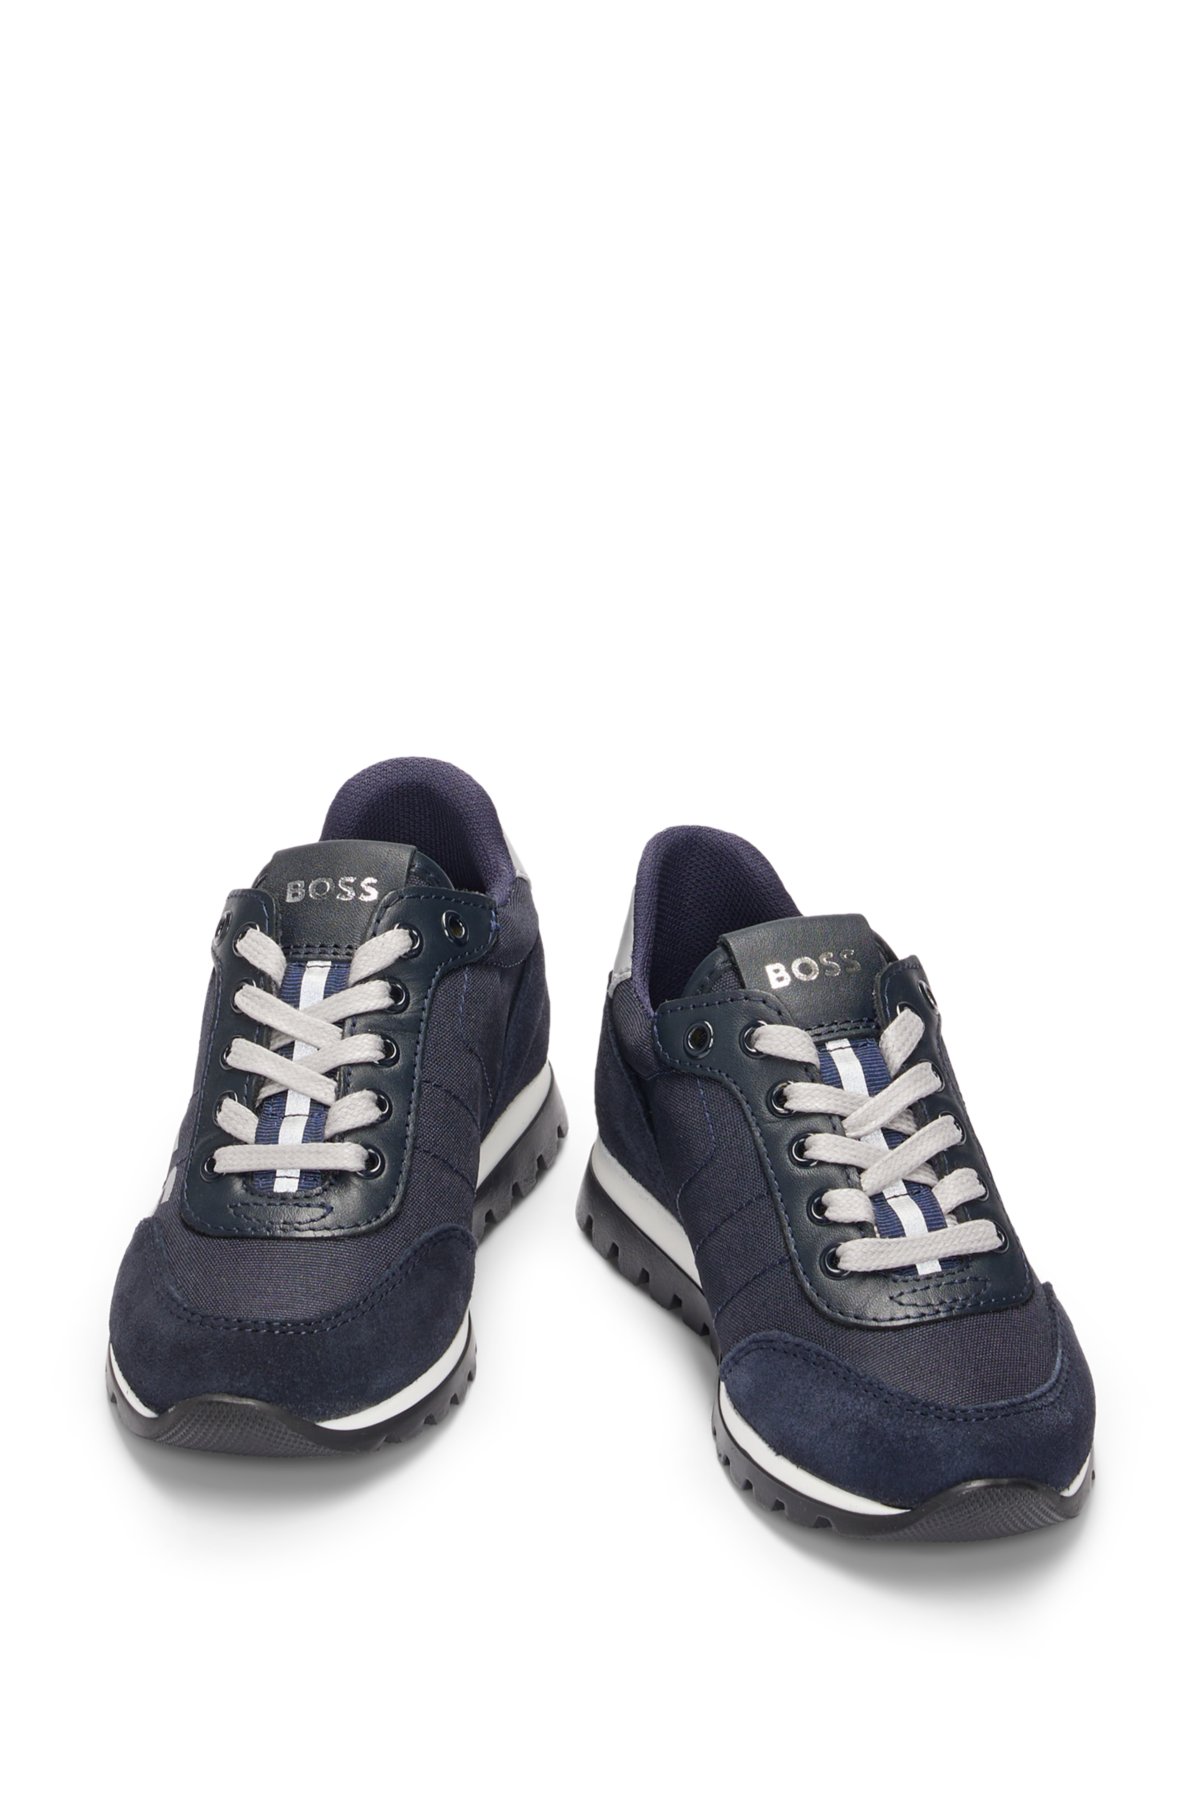 Kids' lace-up trainers with logo details, Dark Blue